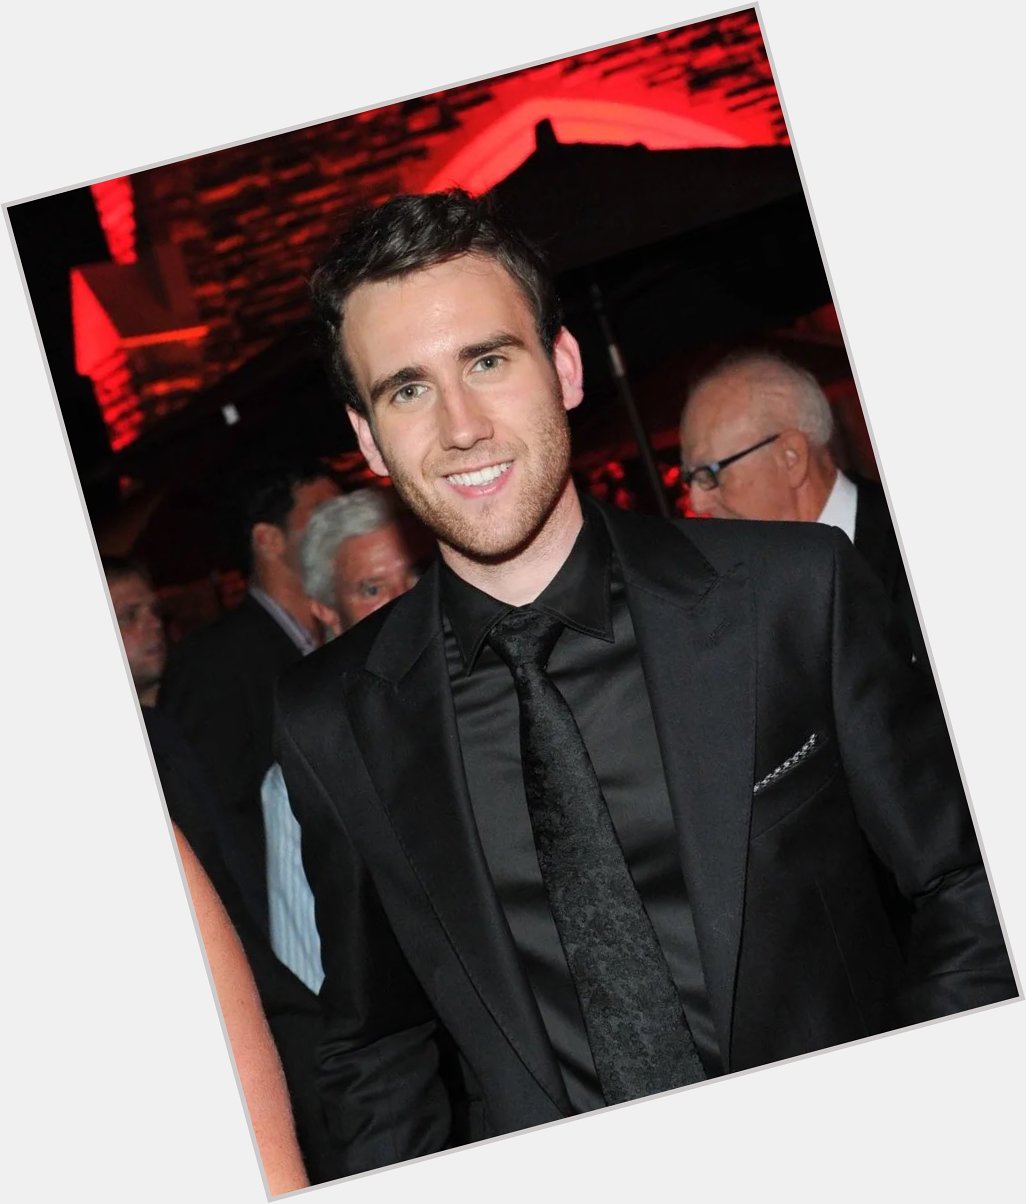  Happy birthday to Matthew Lewis who portrayed Neville Longbottom in the films! 